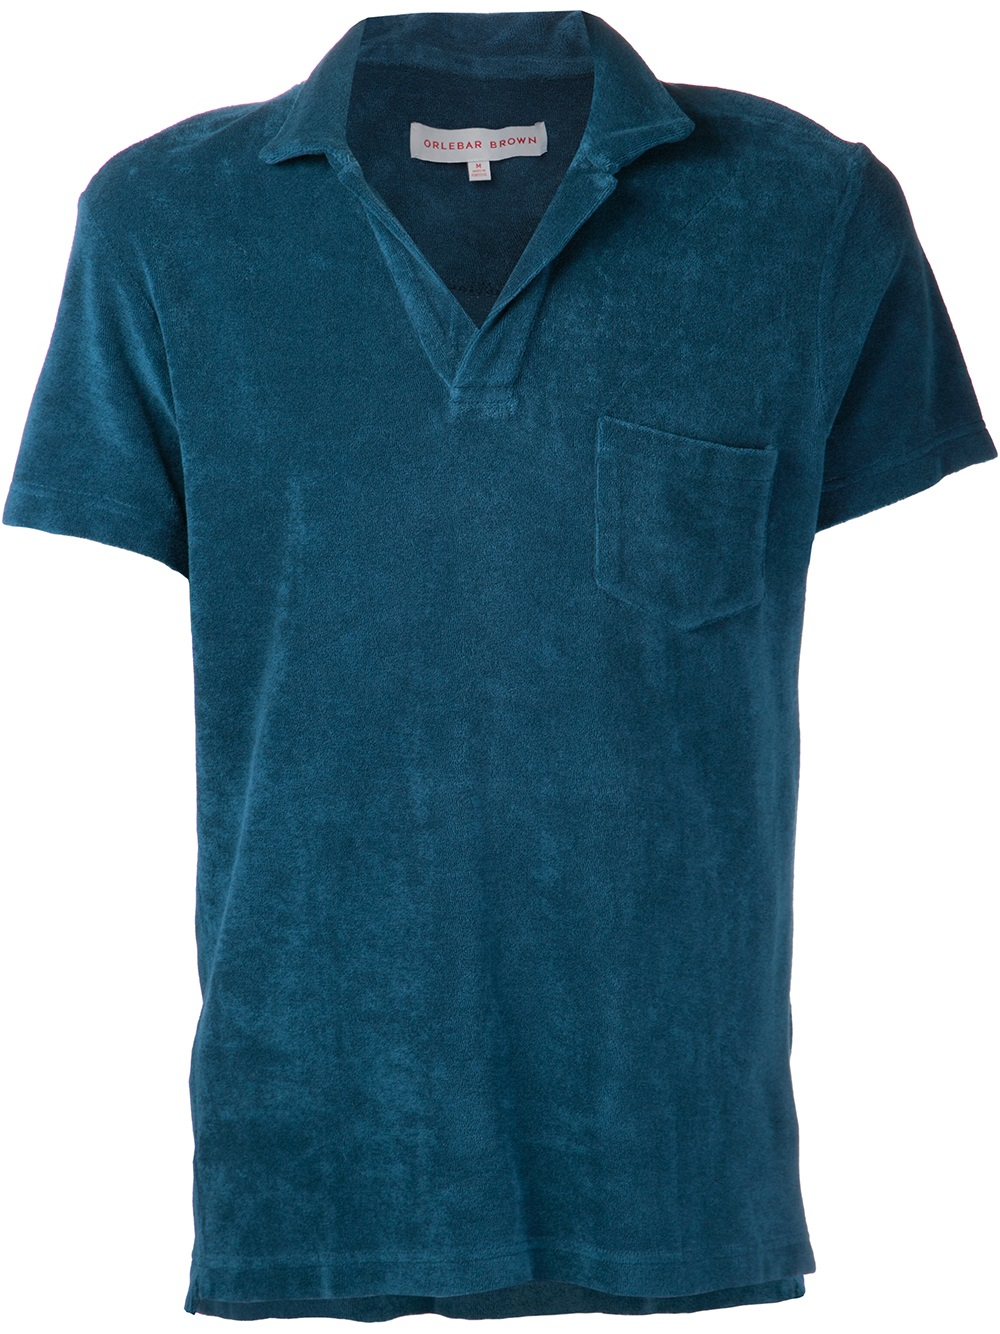 Lyst - Orlebar brown Terry Cloth Shirt in Green for Men